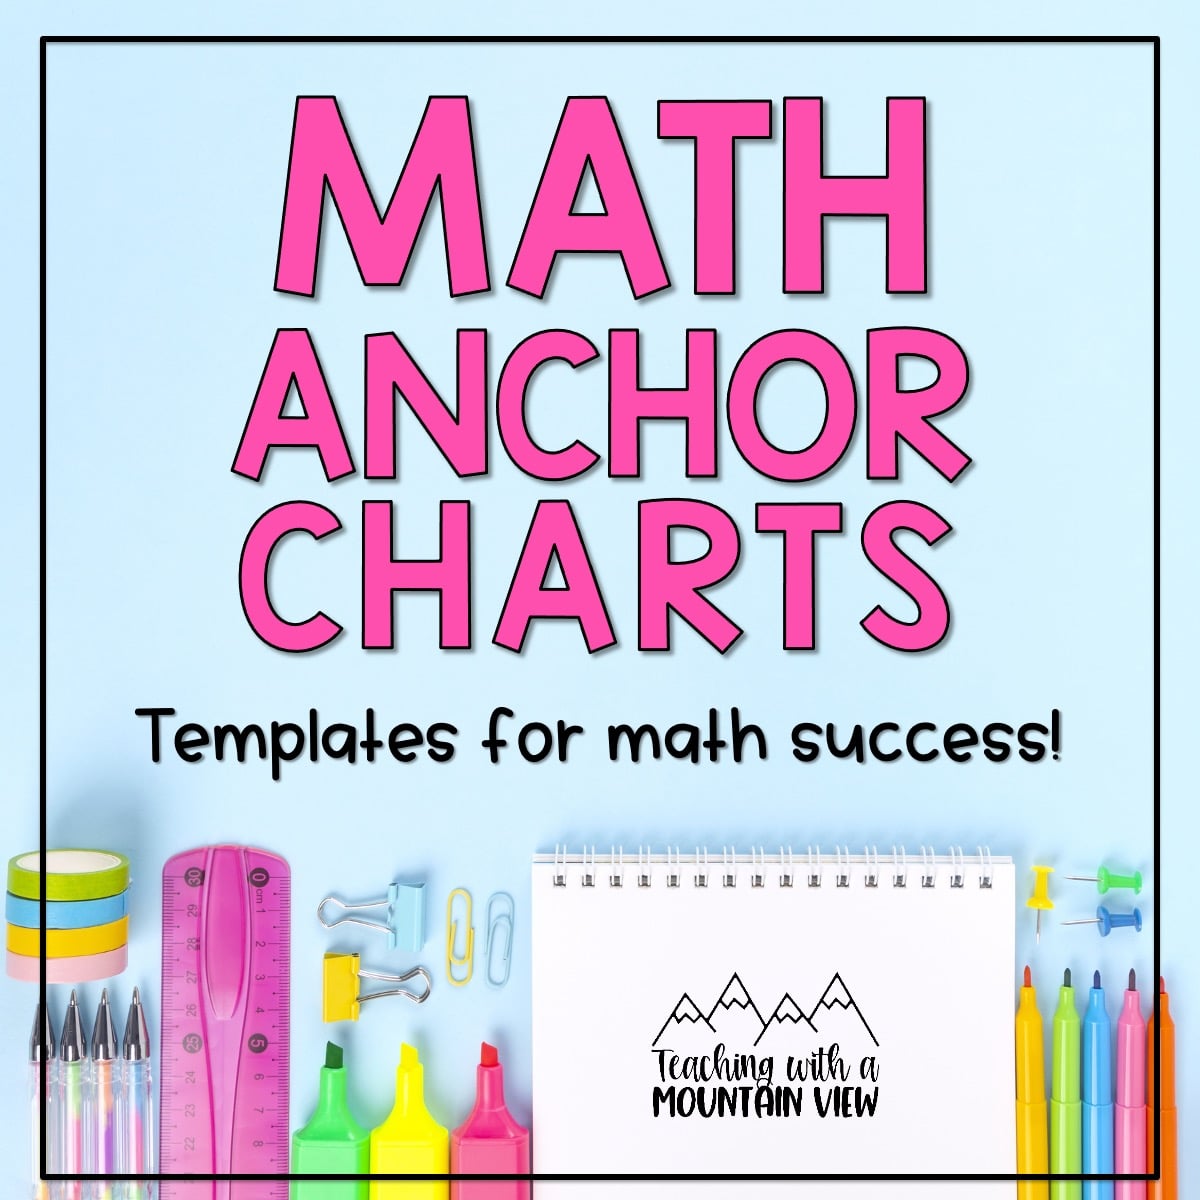 Tips and templates for creating math anchor charts and quick reference guides with your upper elementary students. Includes 10 free templates.